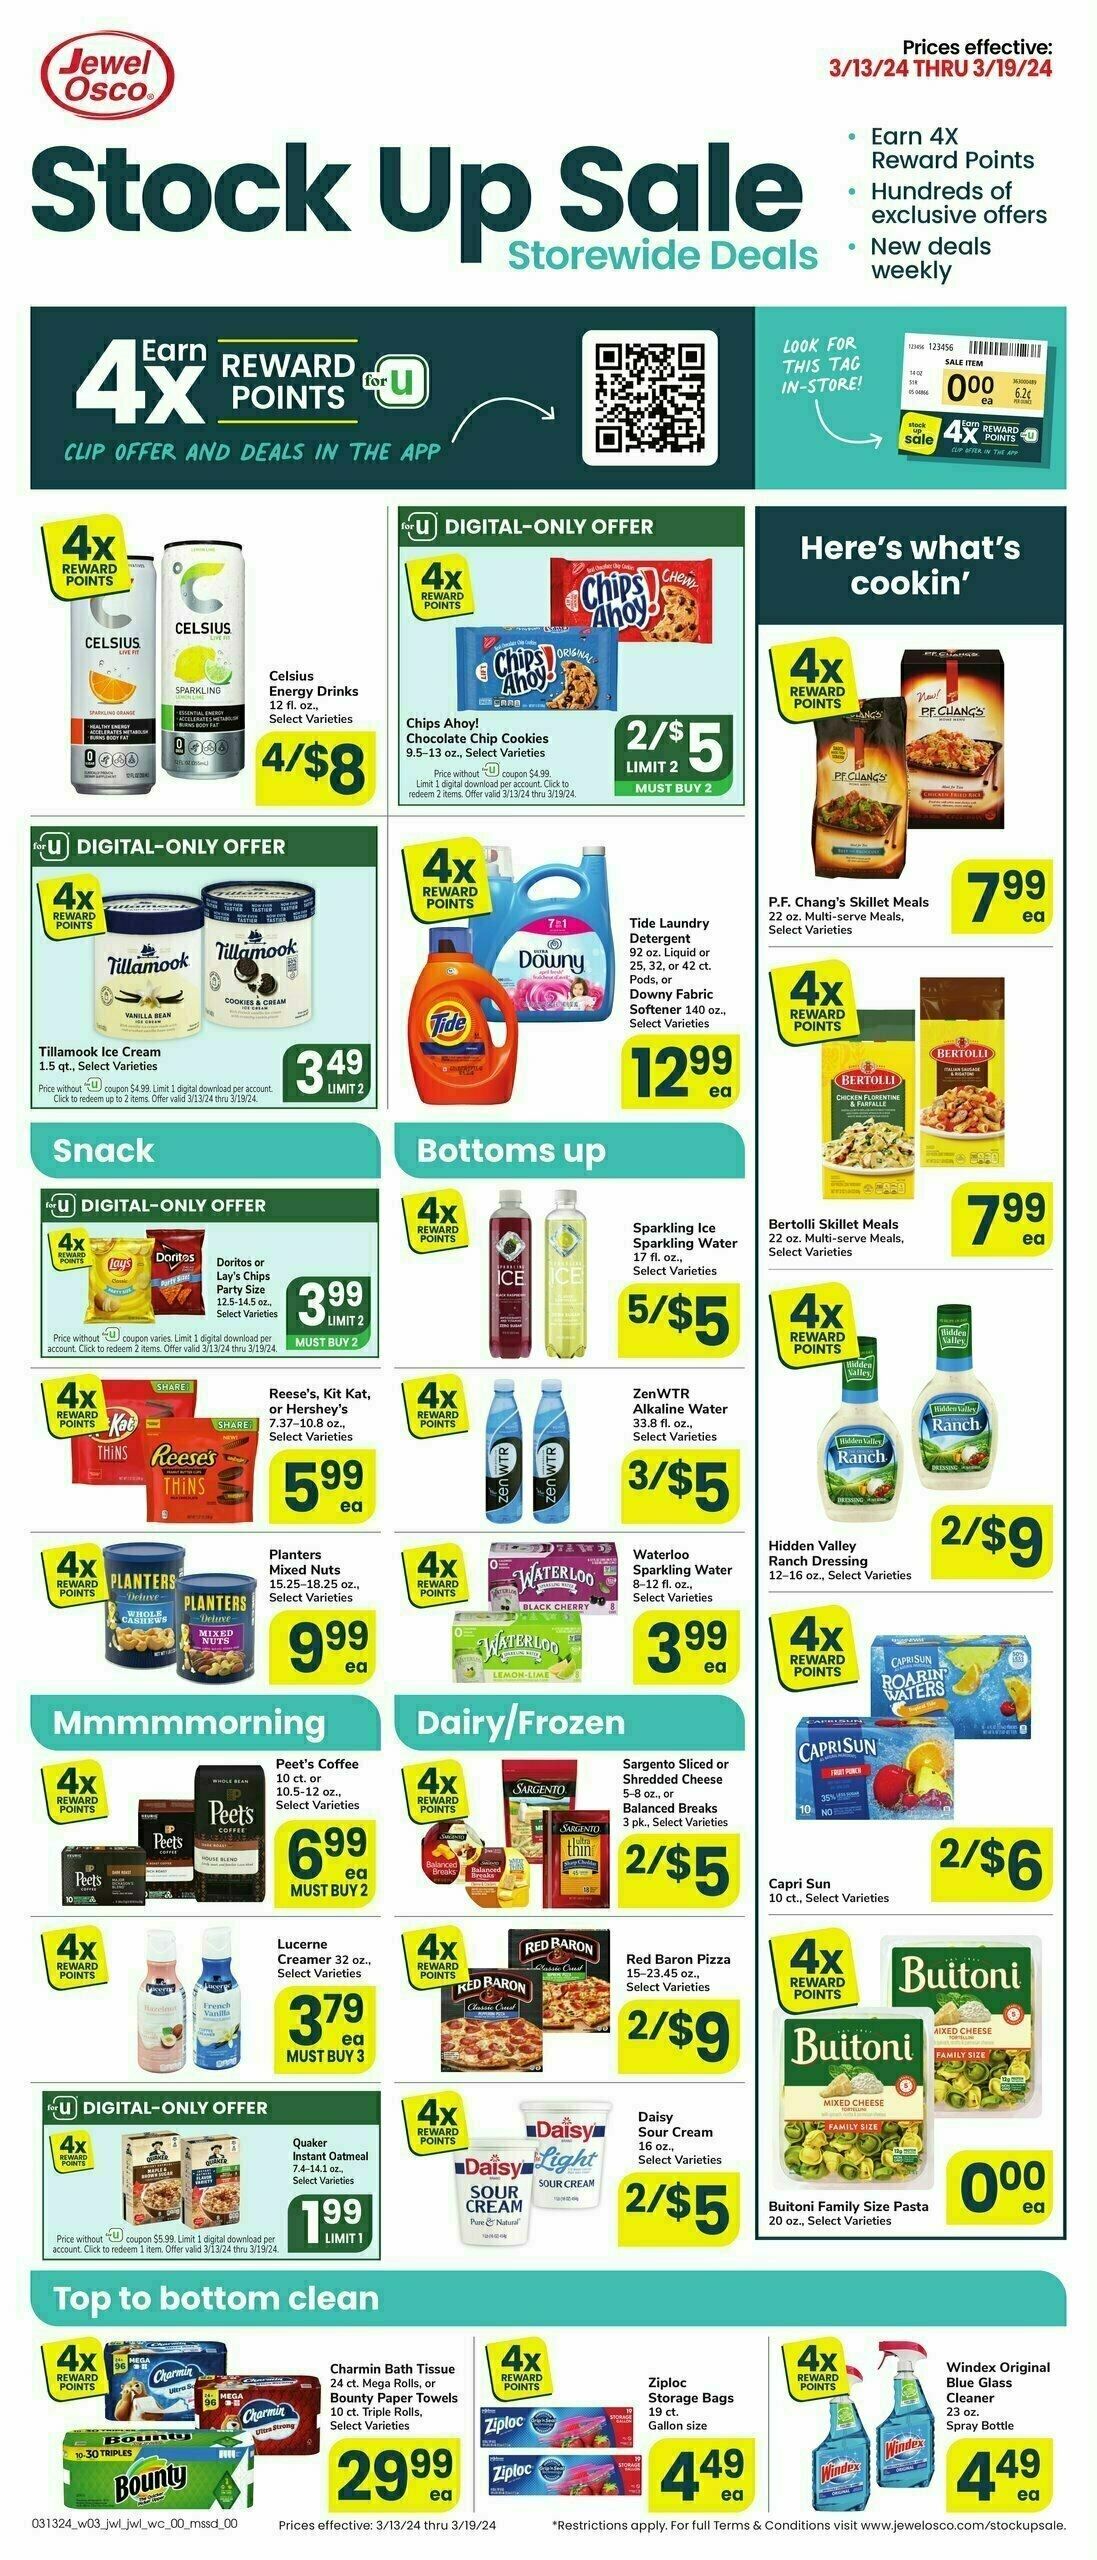 Jewel Osco Stock Up Sale Weekly Ad from March 13